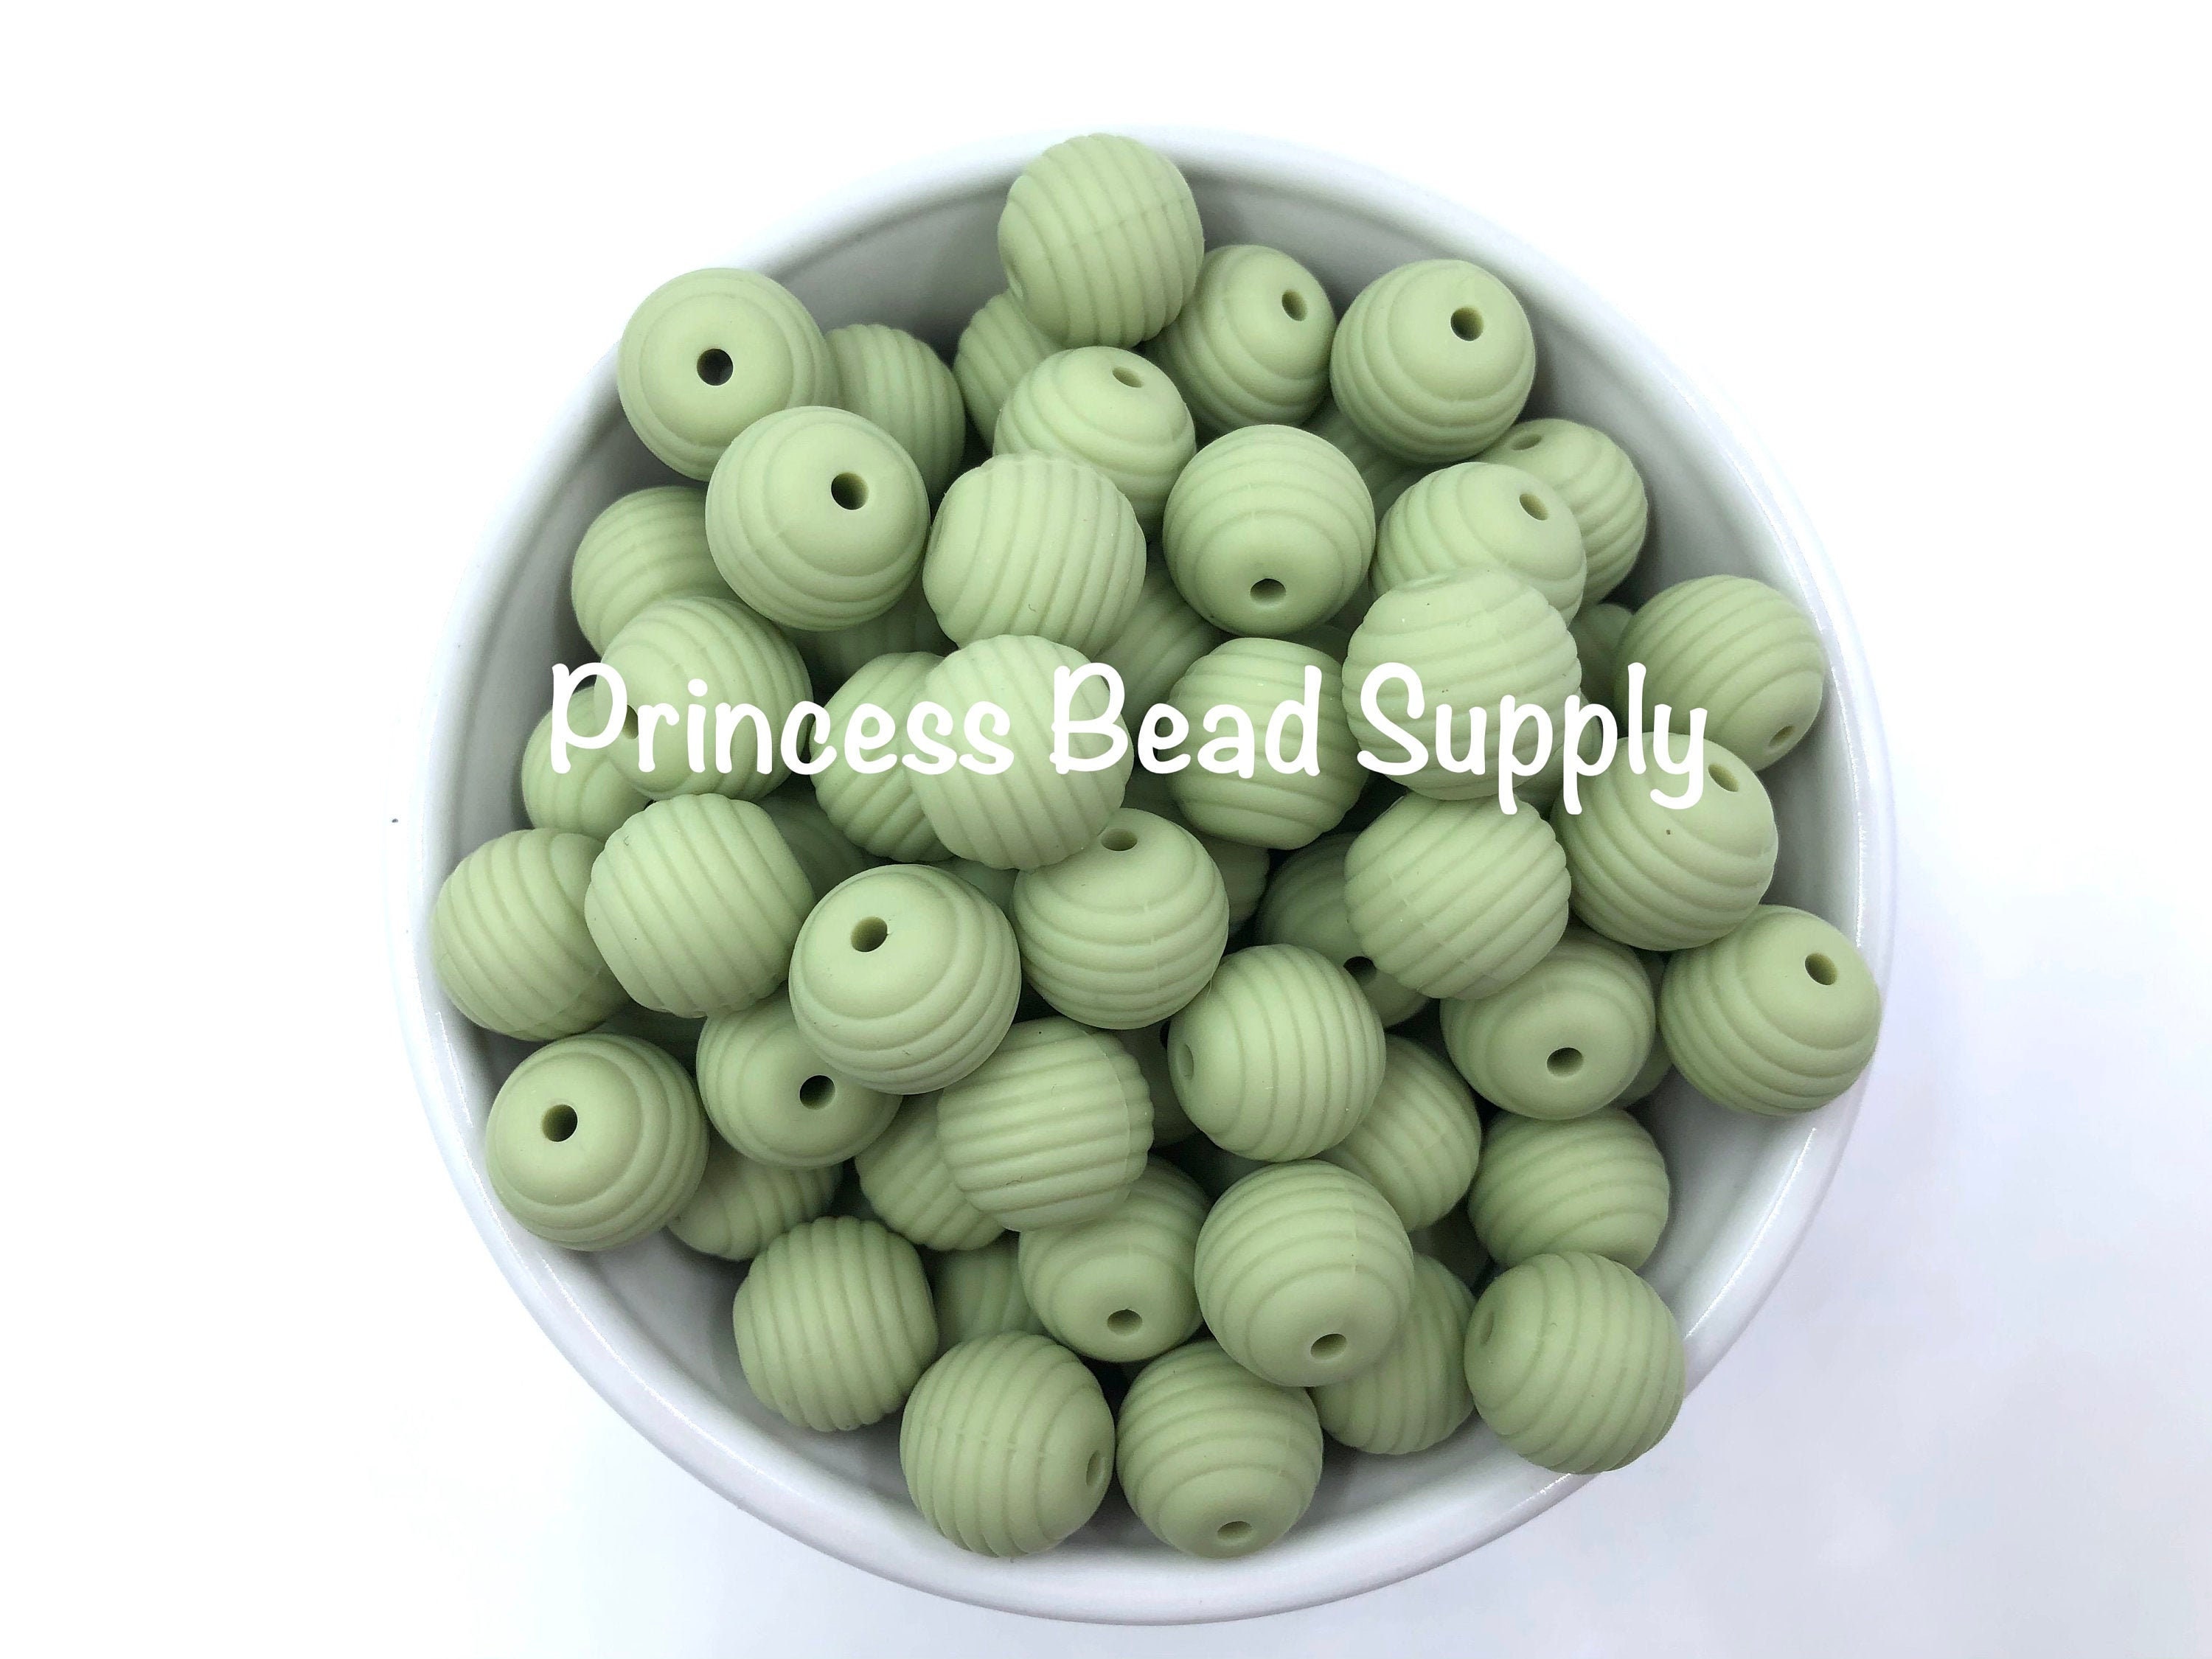 50 PCS 15mm Silicone Beads, Silicone Beads Bulk Rubber Round Focal Beads  for Pens, Durable 15 mm Silicone Beads, Bulk Kit Rubber Beads for Keychain